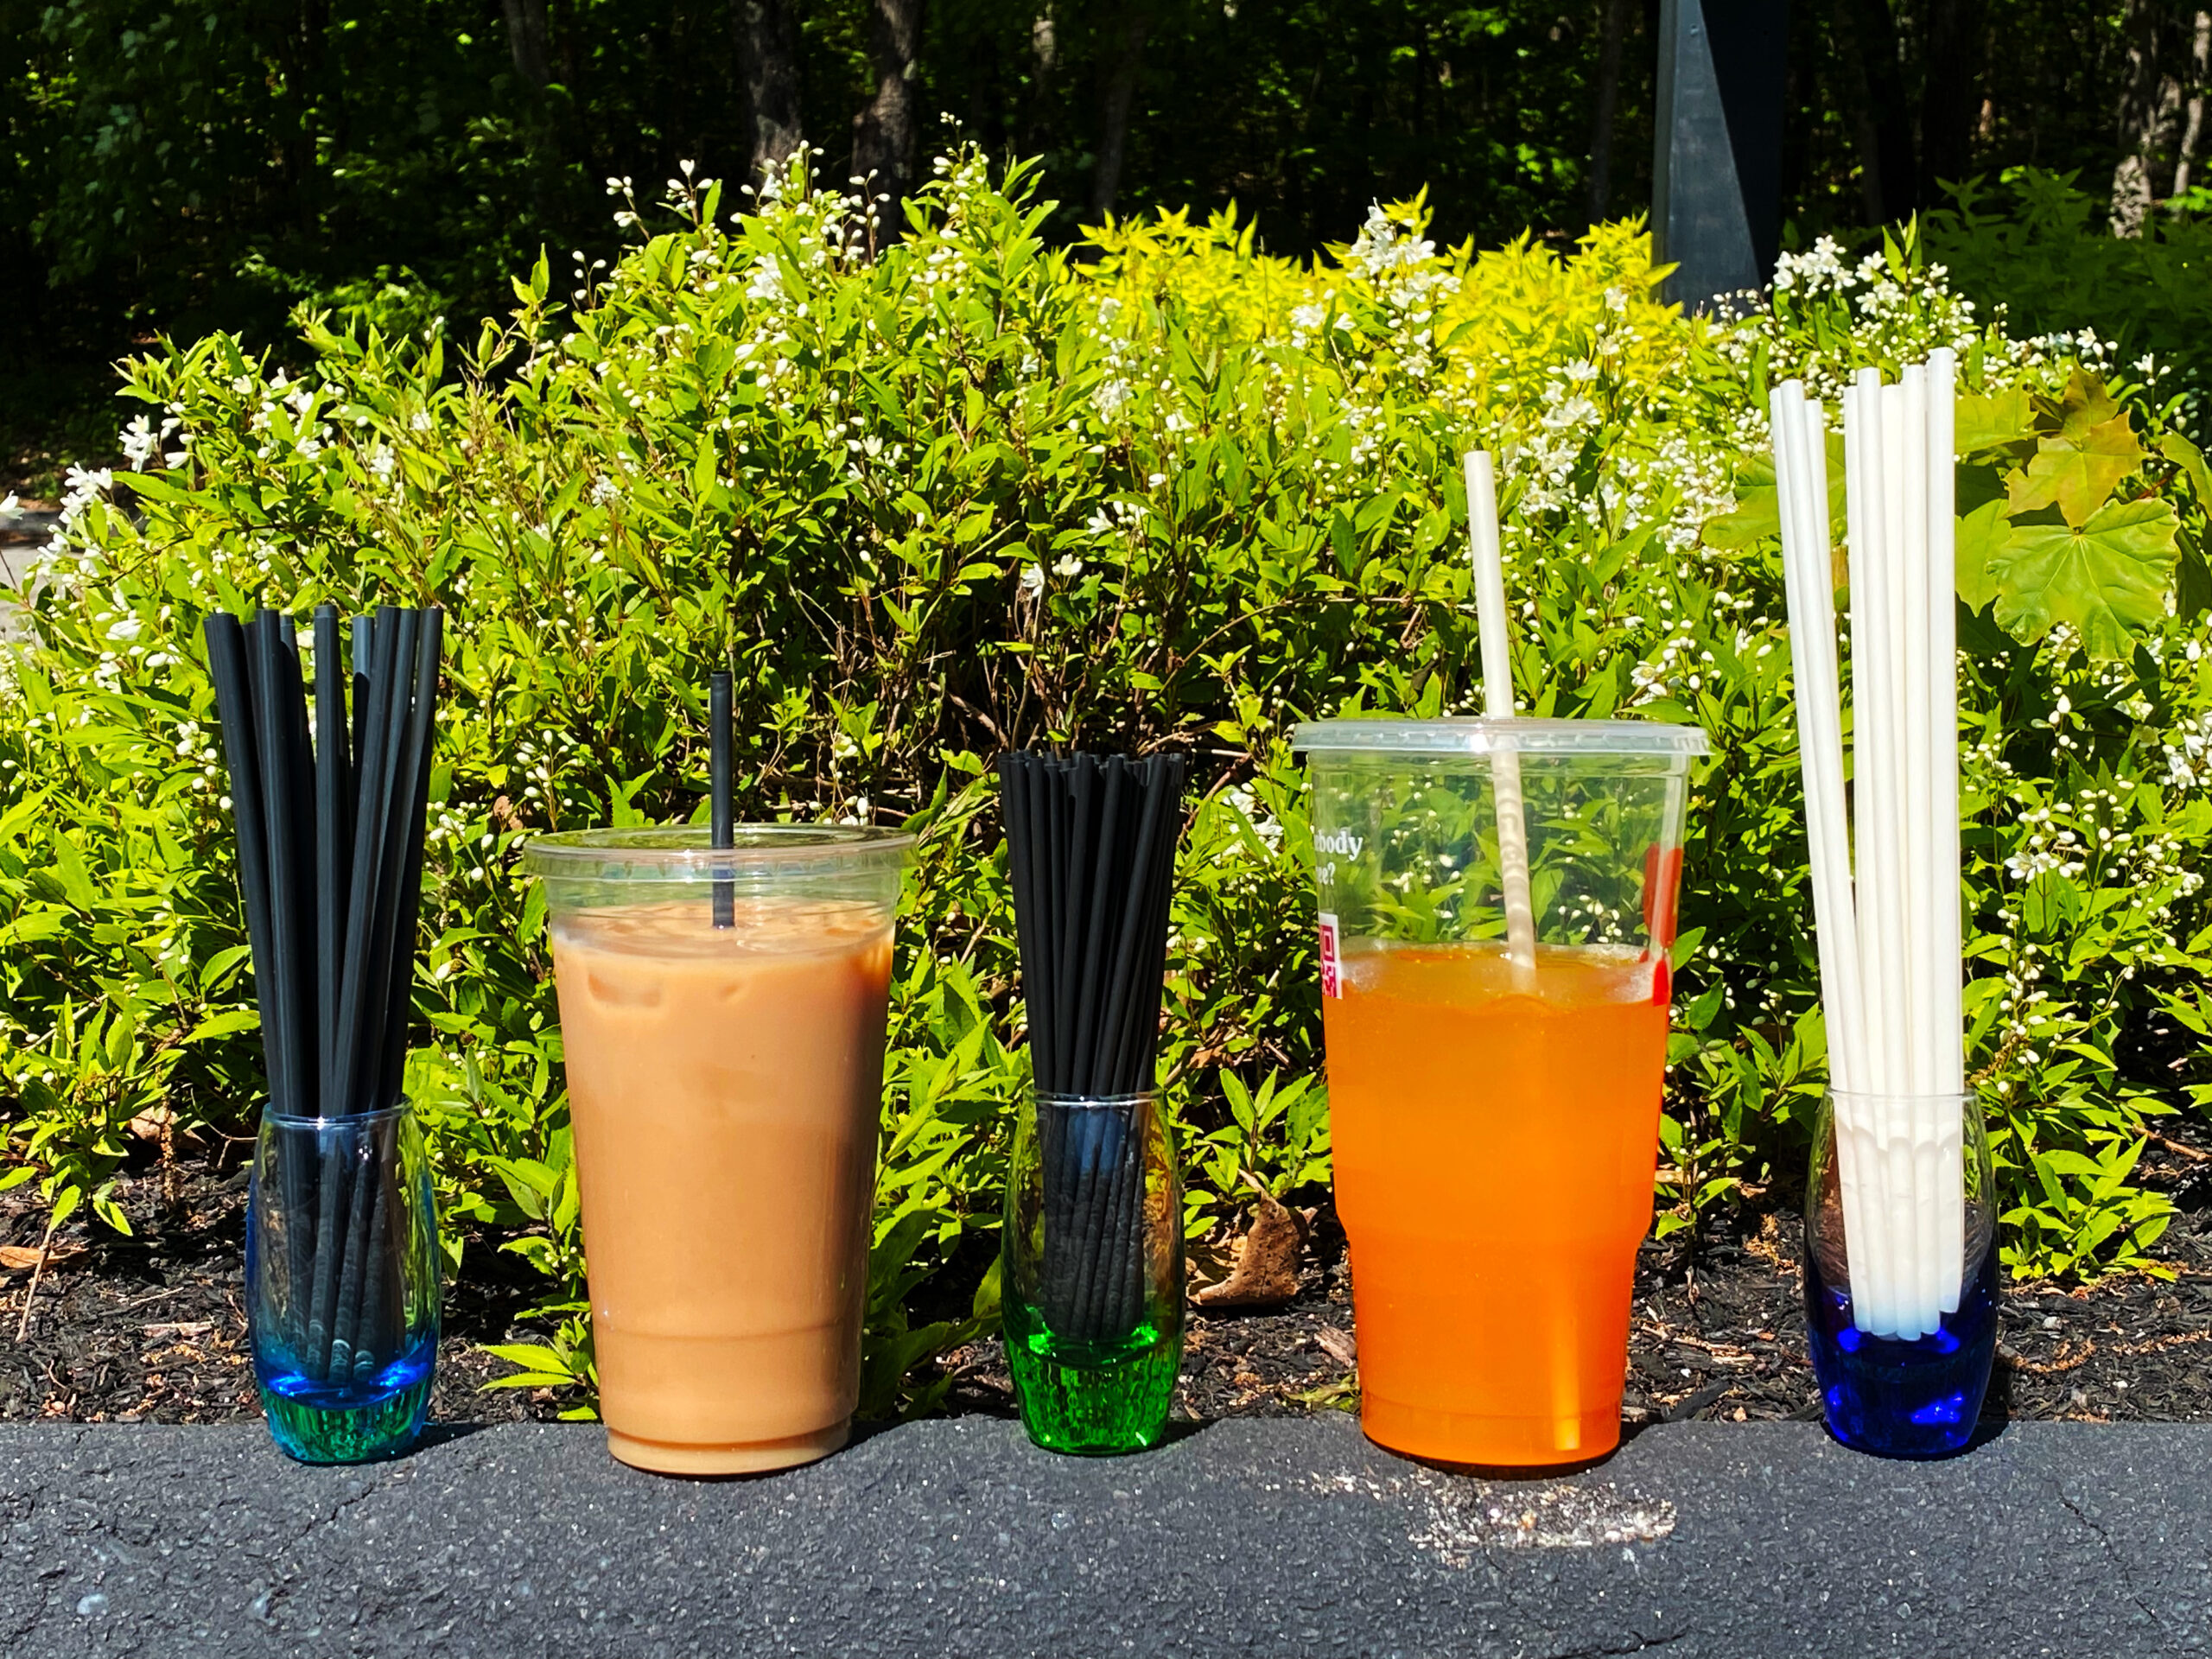 A row of cups sitting on a stone wall. The cups contain compostable, sustainable, plant-based straws produced by UrthPact.